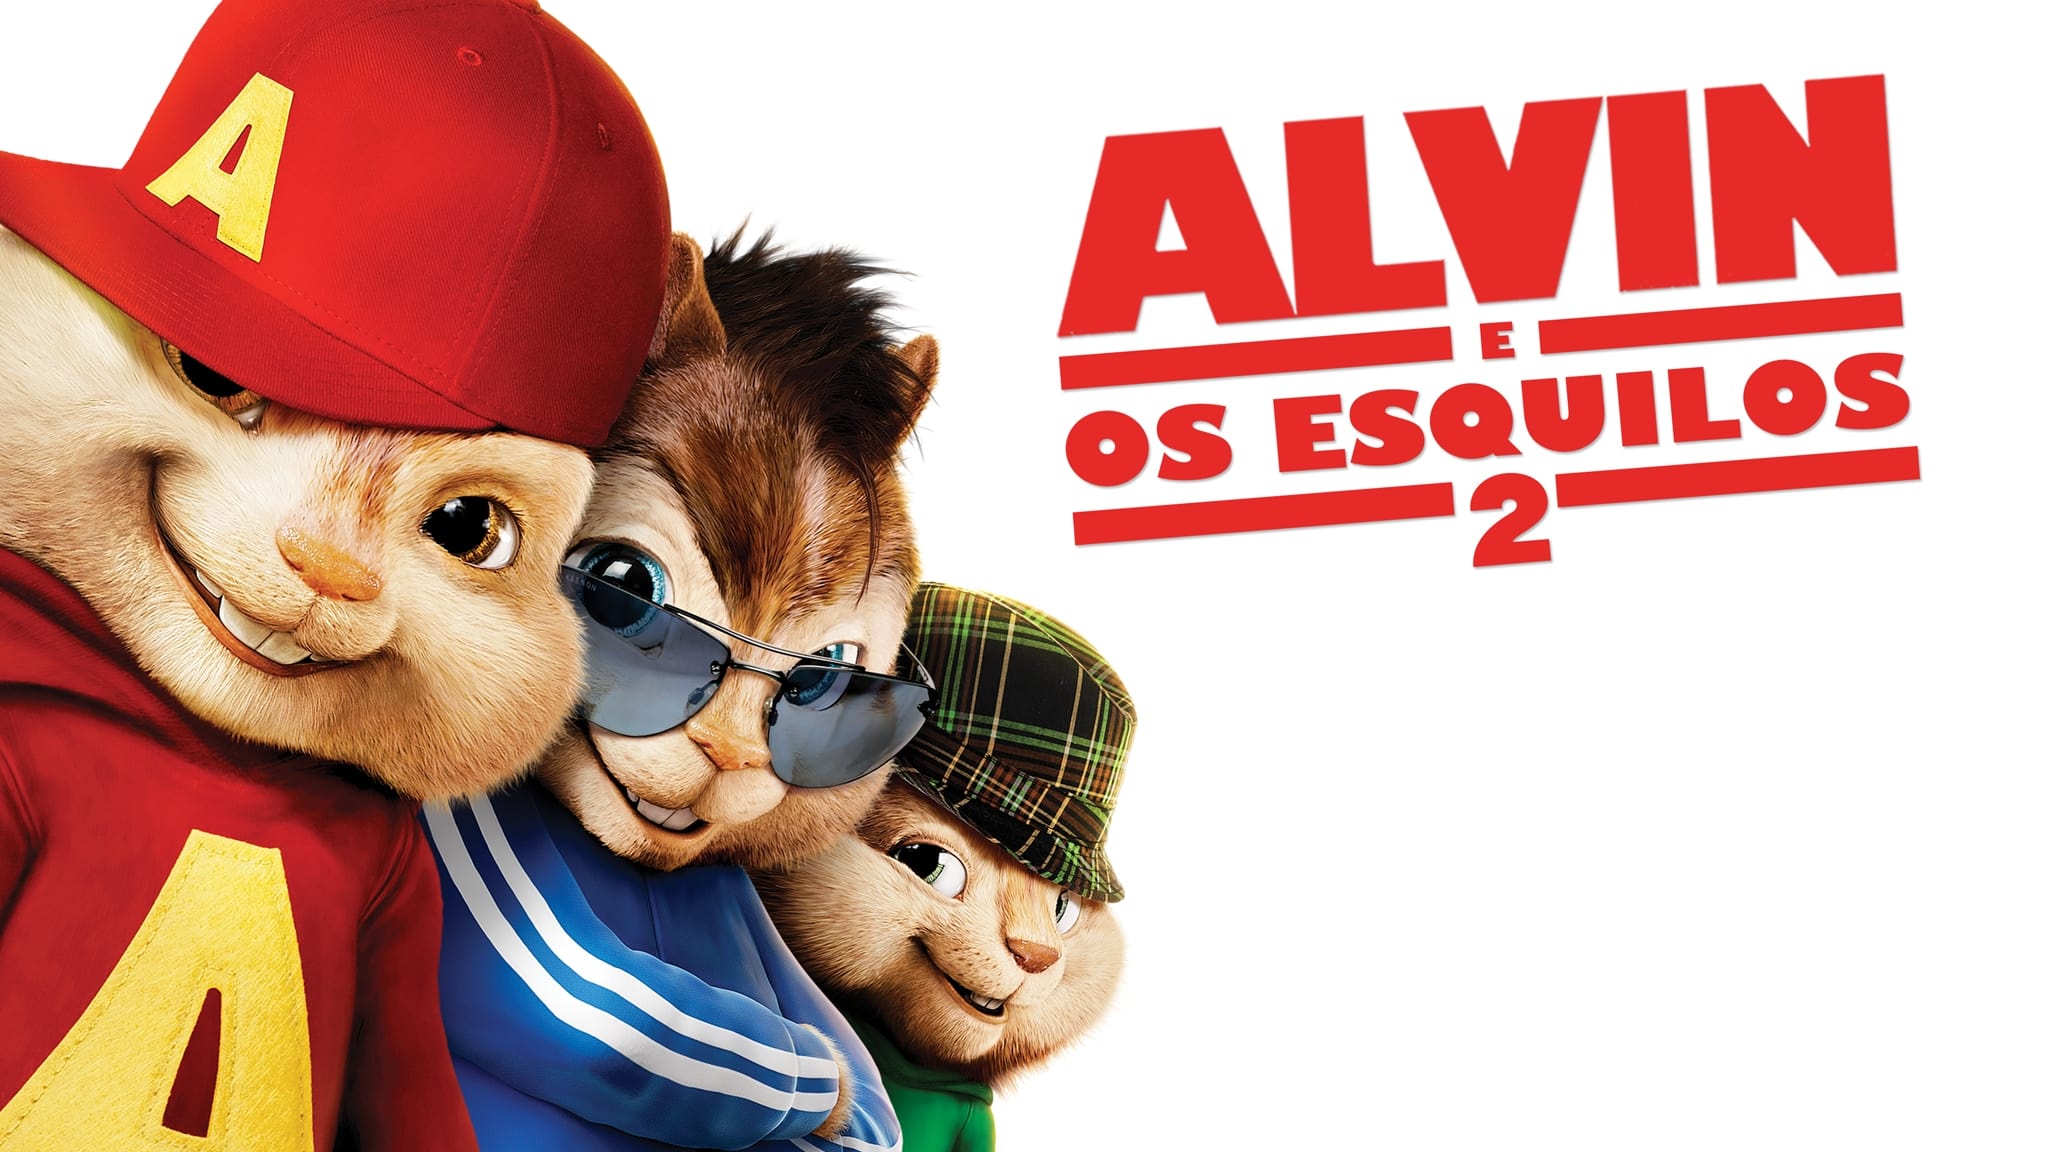 Alvin and the Chipmunks: The Squeakquel. 